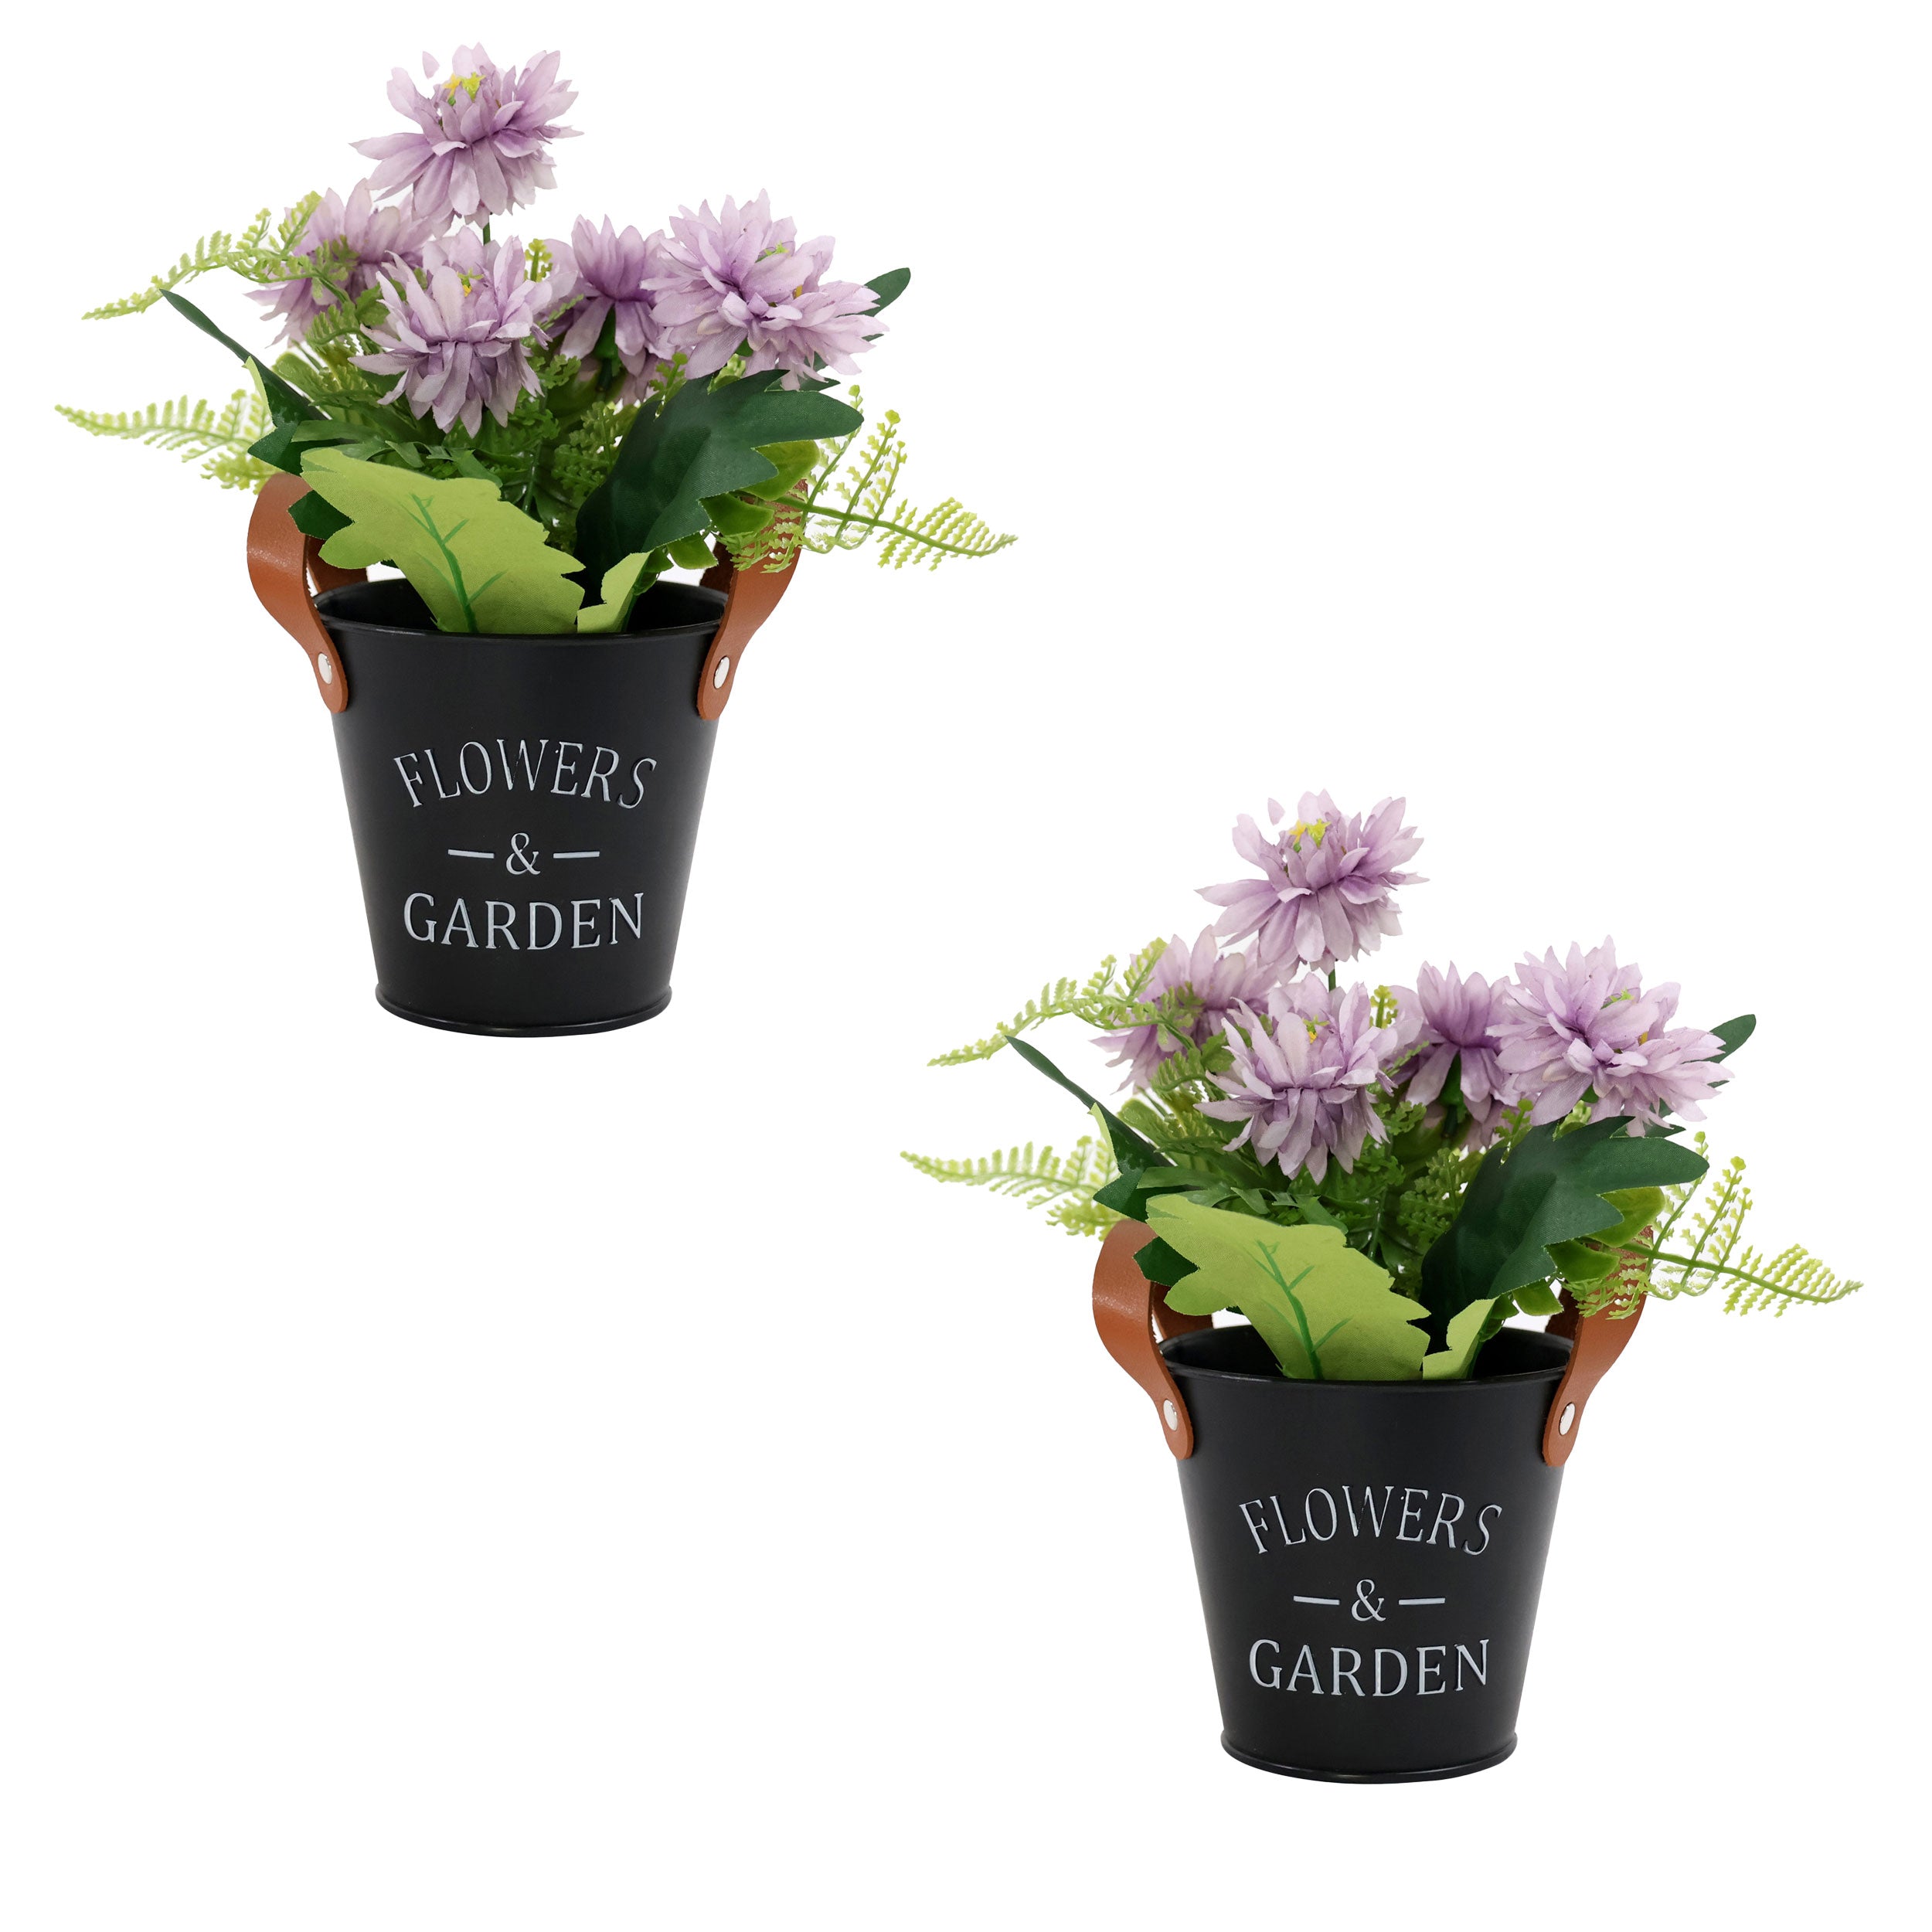 Aavana greens Artificial Bonsai Plant, Purple Chrysanthemum Artificial Flowers Plant, Artificial Decorative Plant Home Office Indoor and Outdoor Decoration